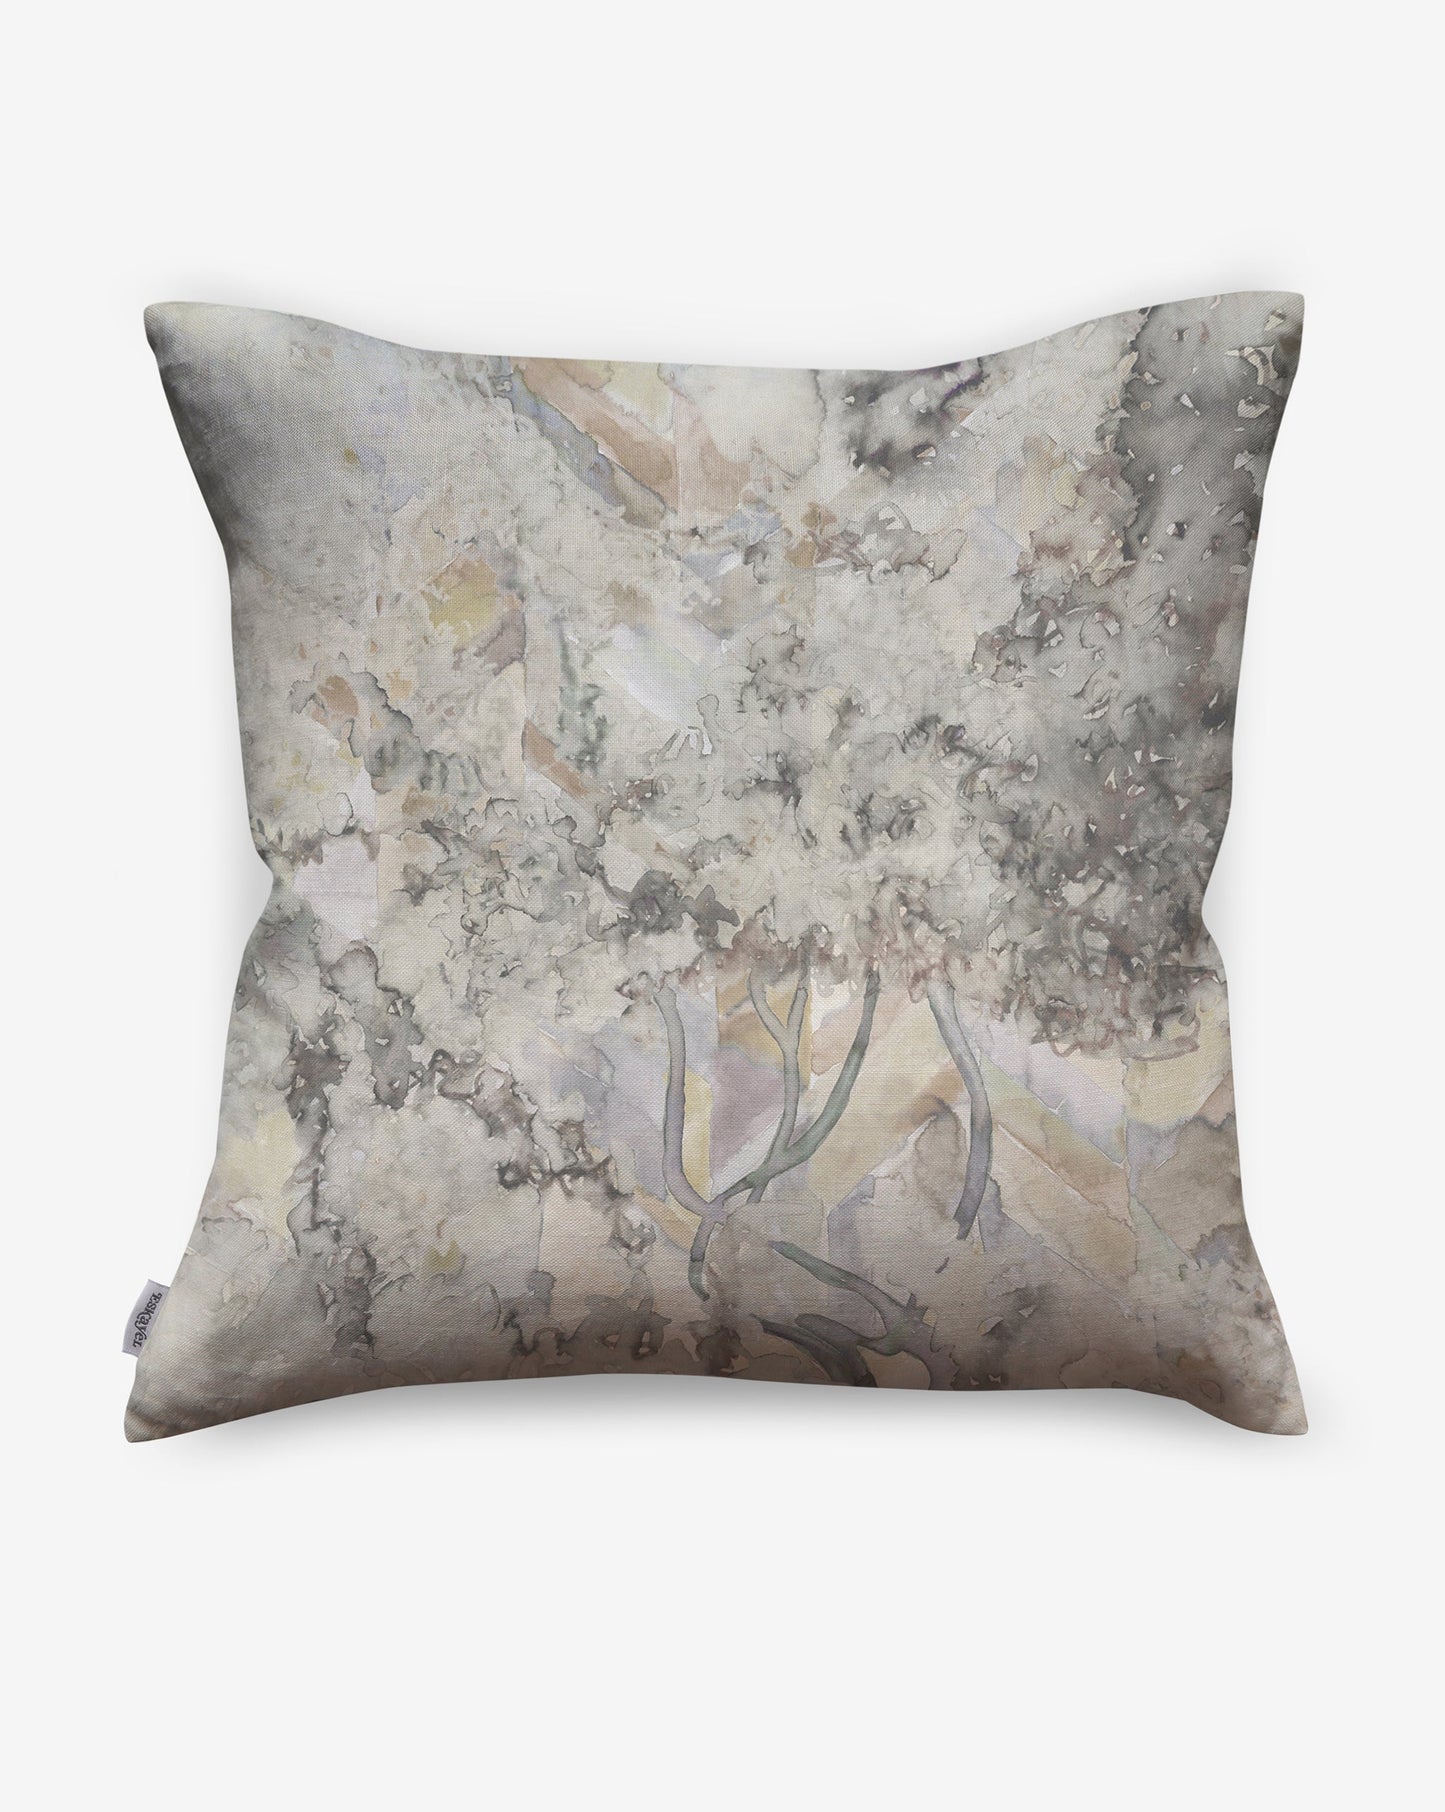 Featuring a floral study on chevrons, Inflorescence pillows in our Sol colorway provide a palette of taupe, tan and grey